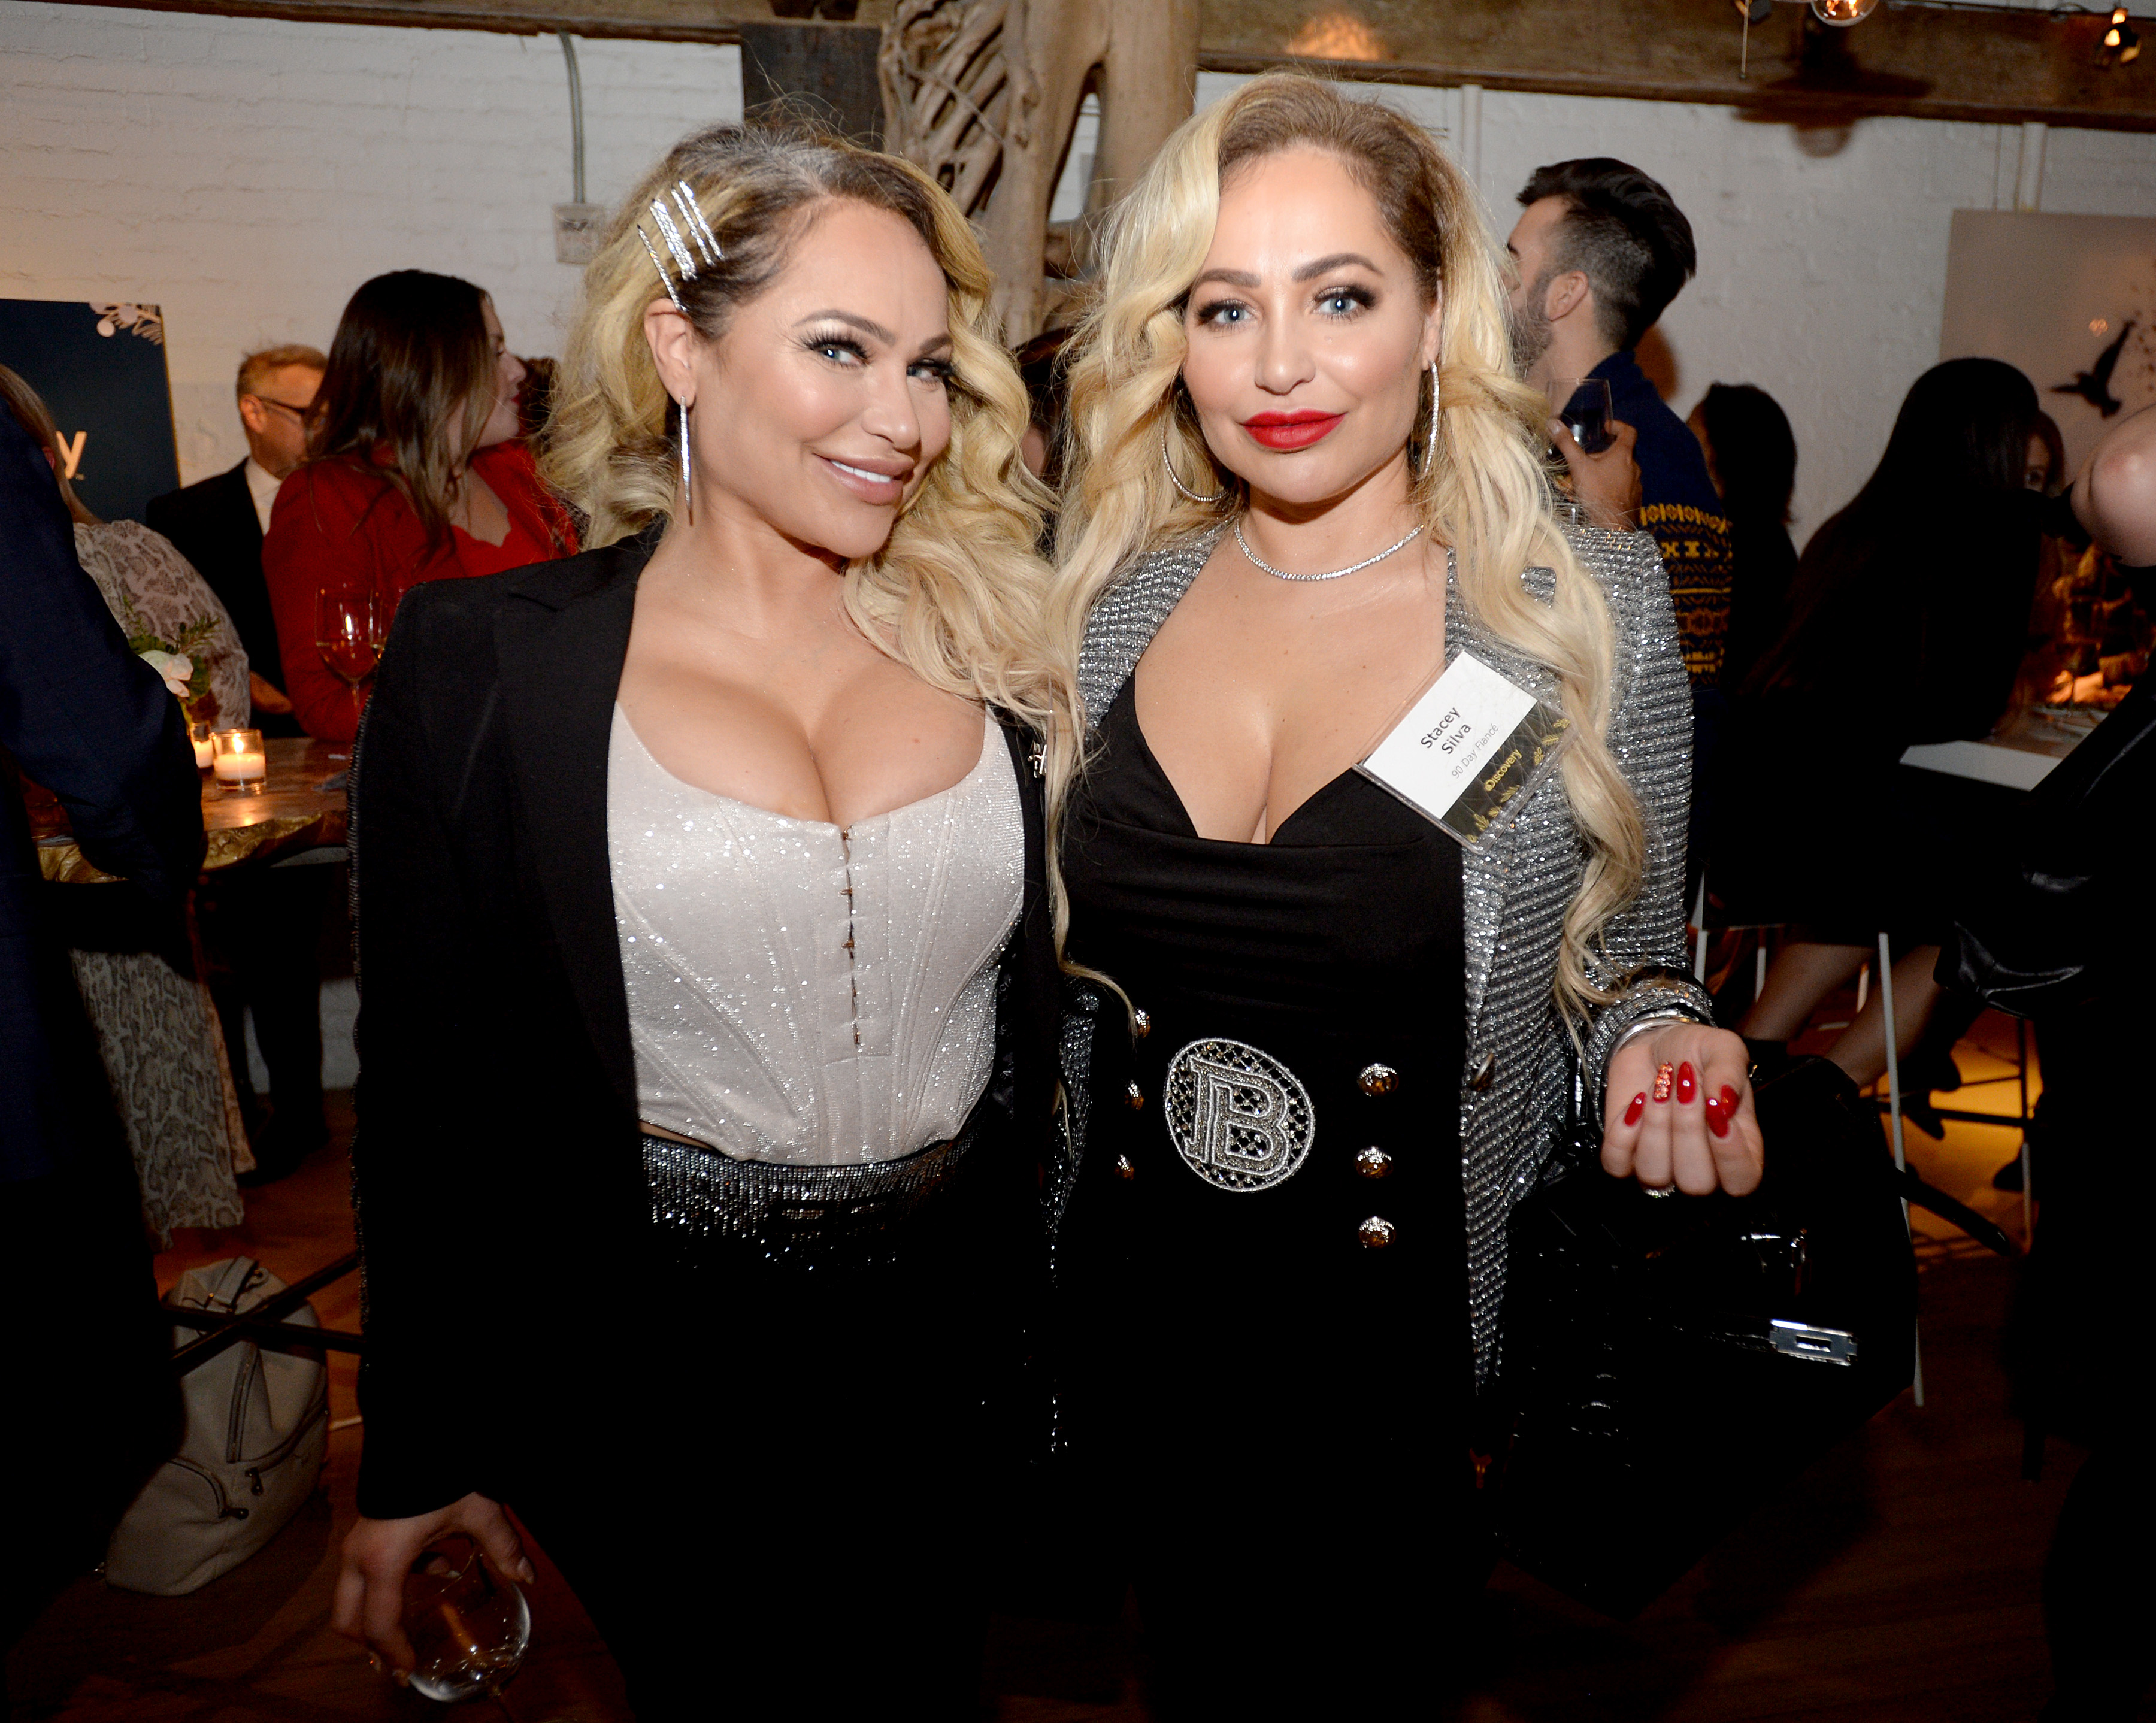 Darcey Silva and Stacey Silva attend an event in New York